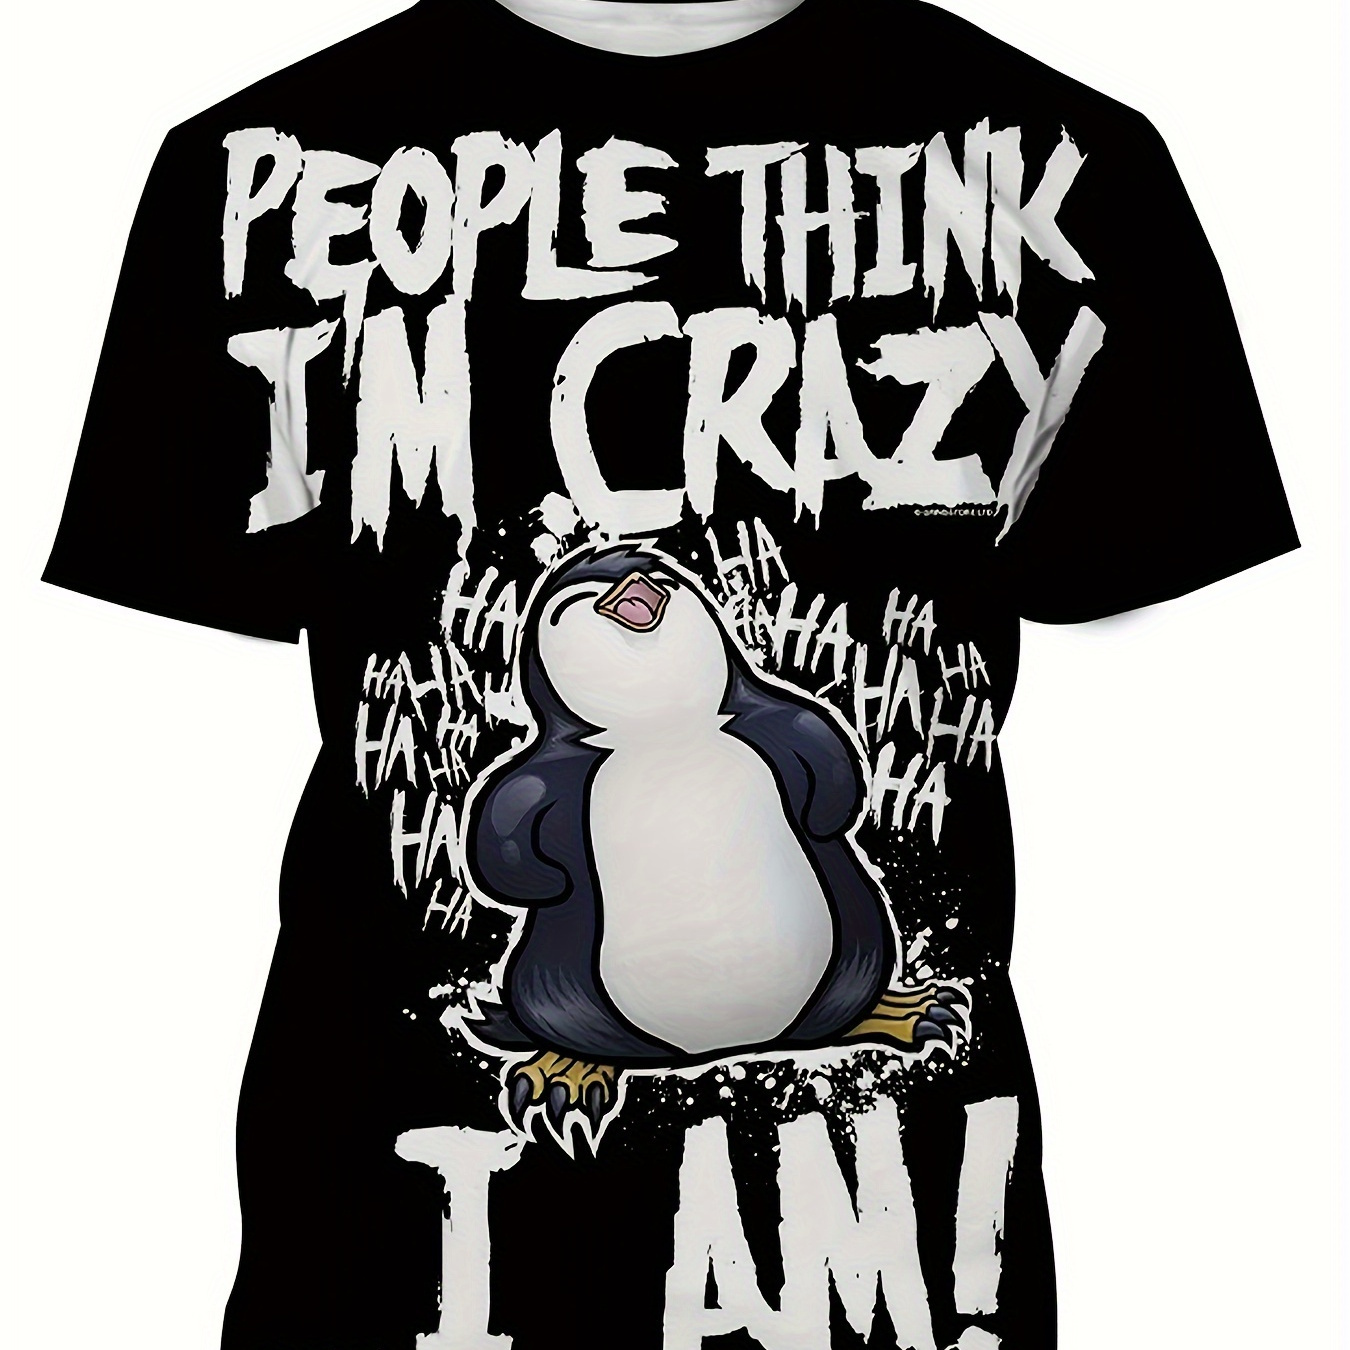 

Laughing Penguin Cartoon And Letter Print Men's Stylish Short Sleeve Crew Neck T-shirt For Summer